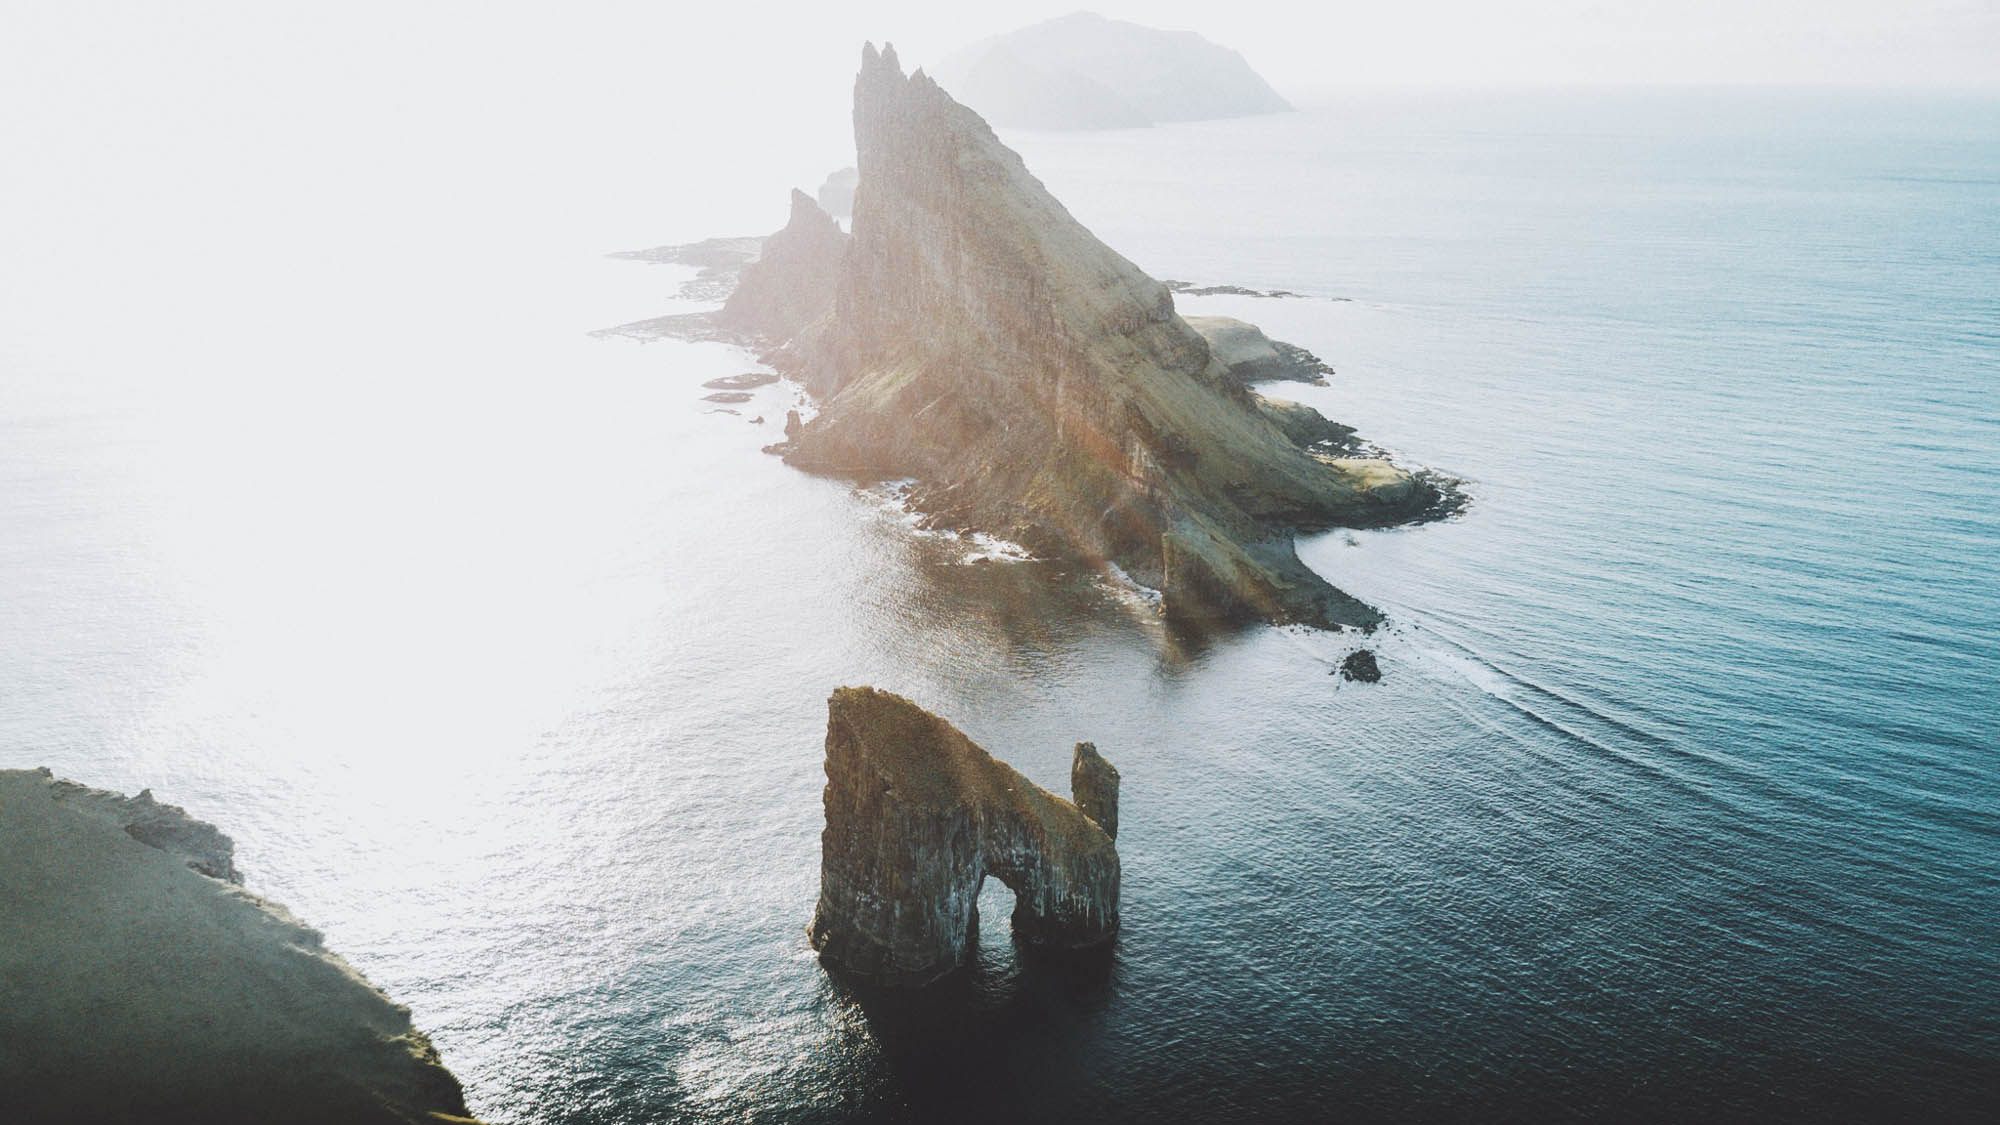 Photo by: Daniel Casson - @dpc_photographyProcessed with VSCO with a9 preset